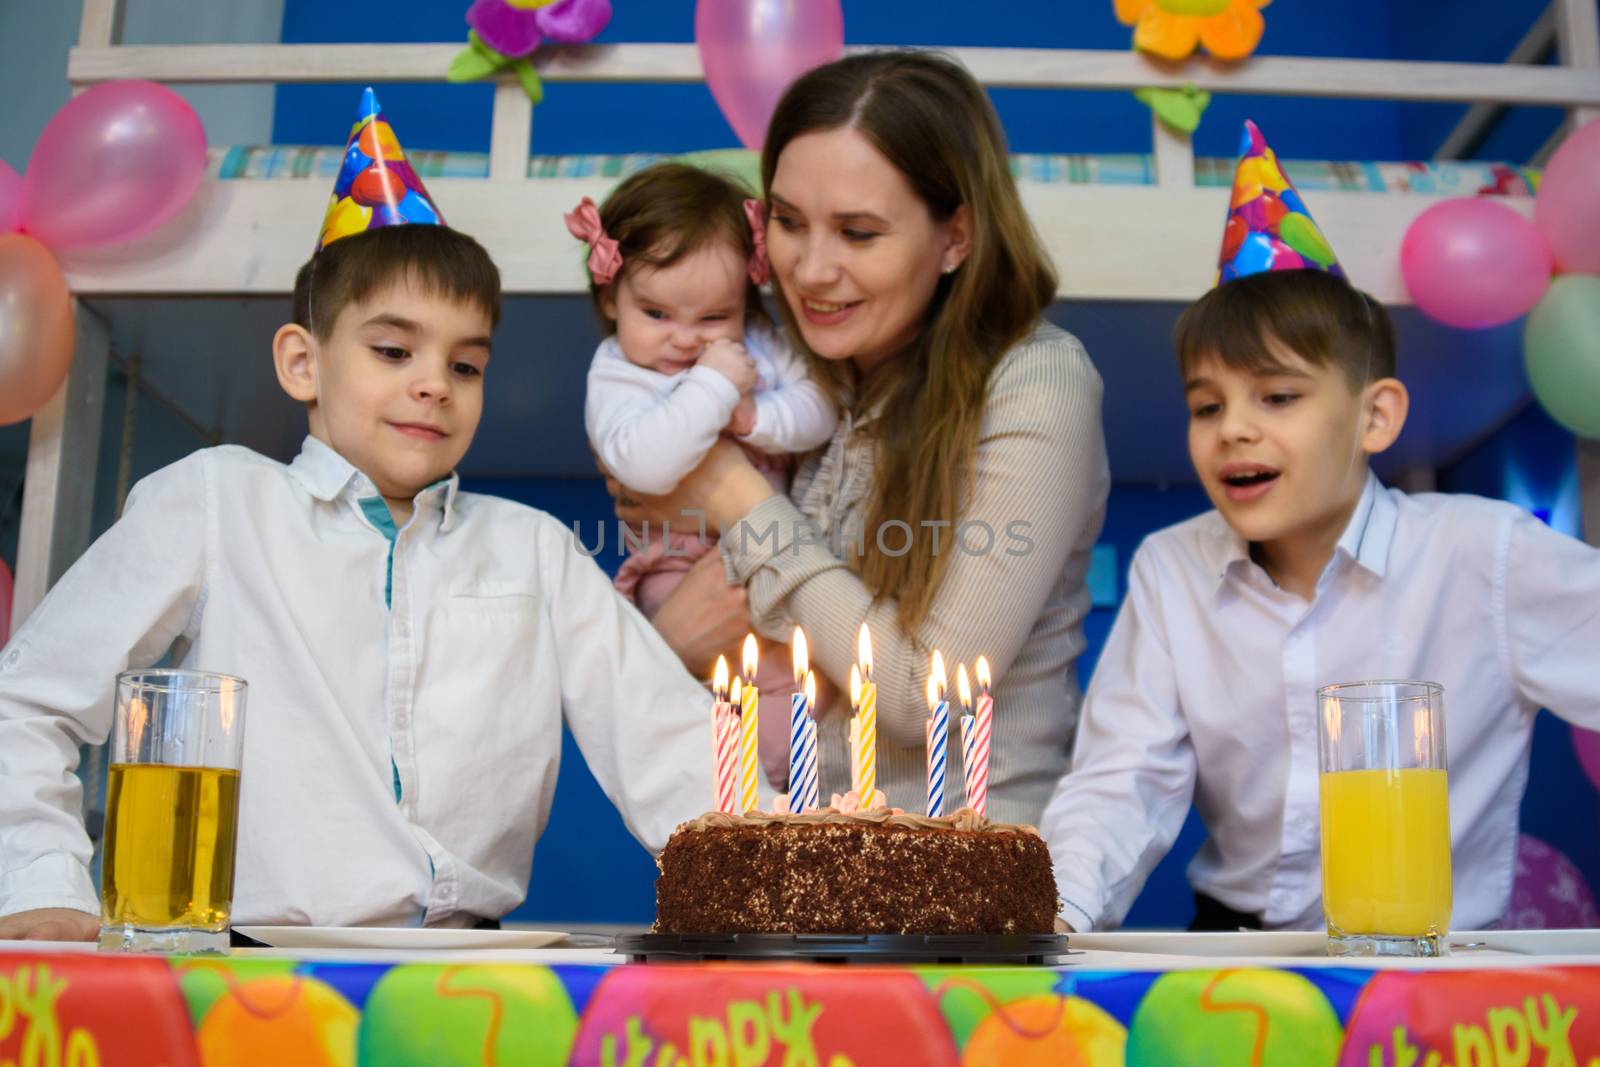 Children prepare to put out candles on a festive cake